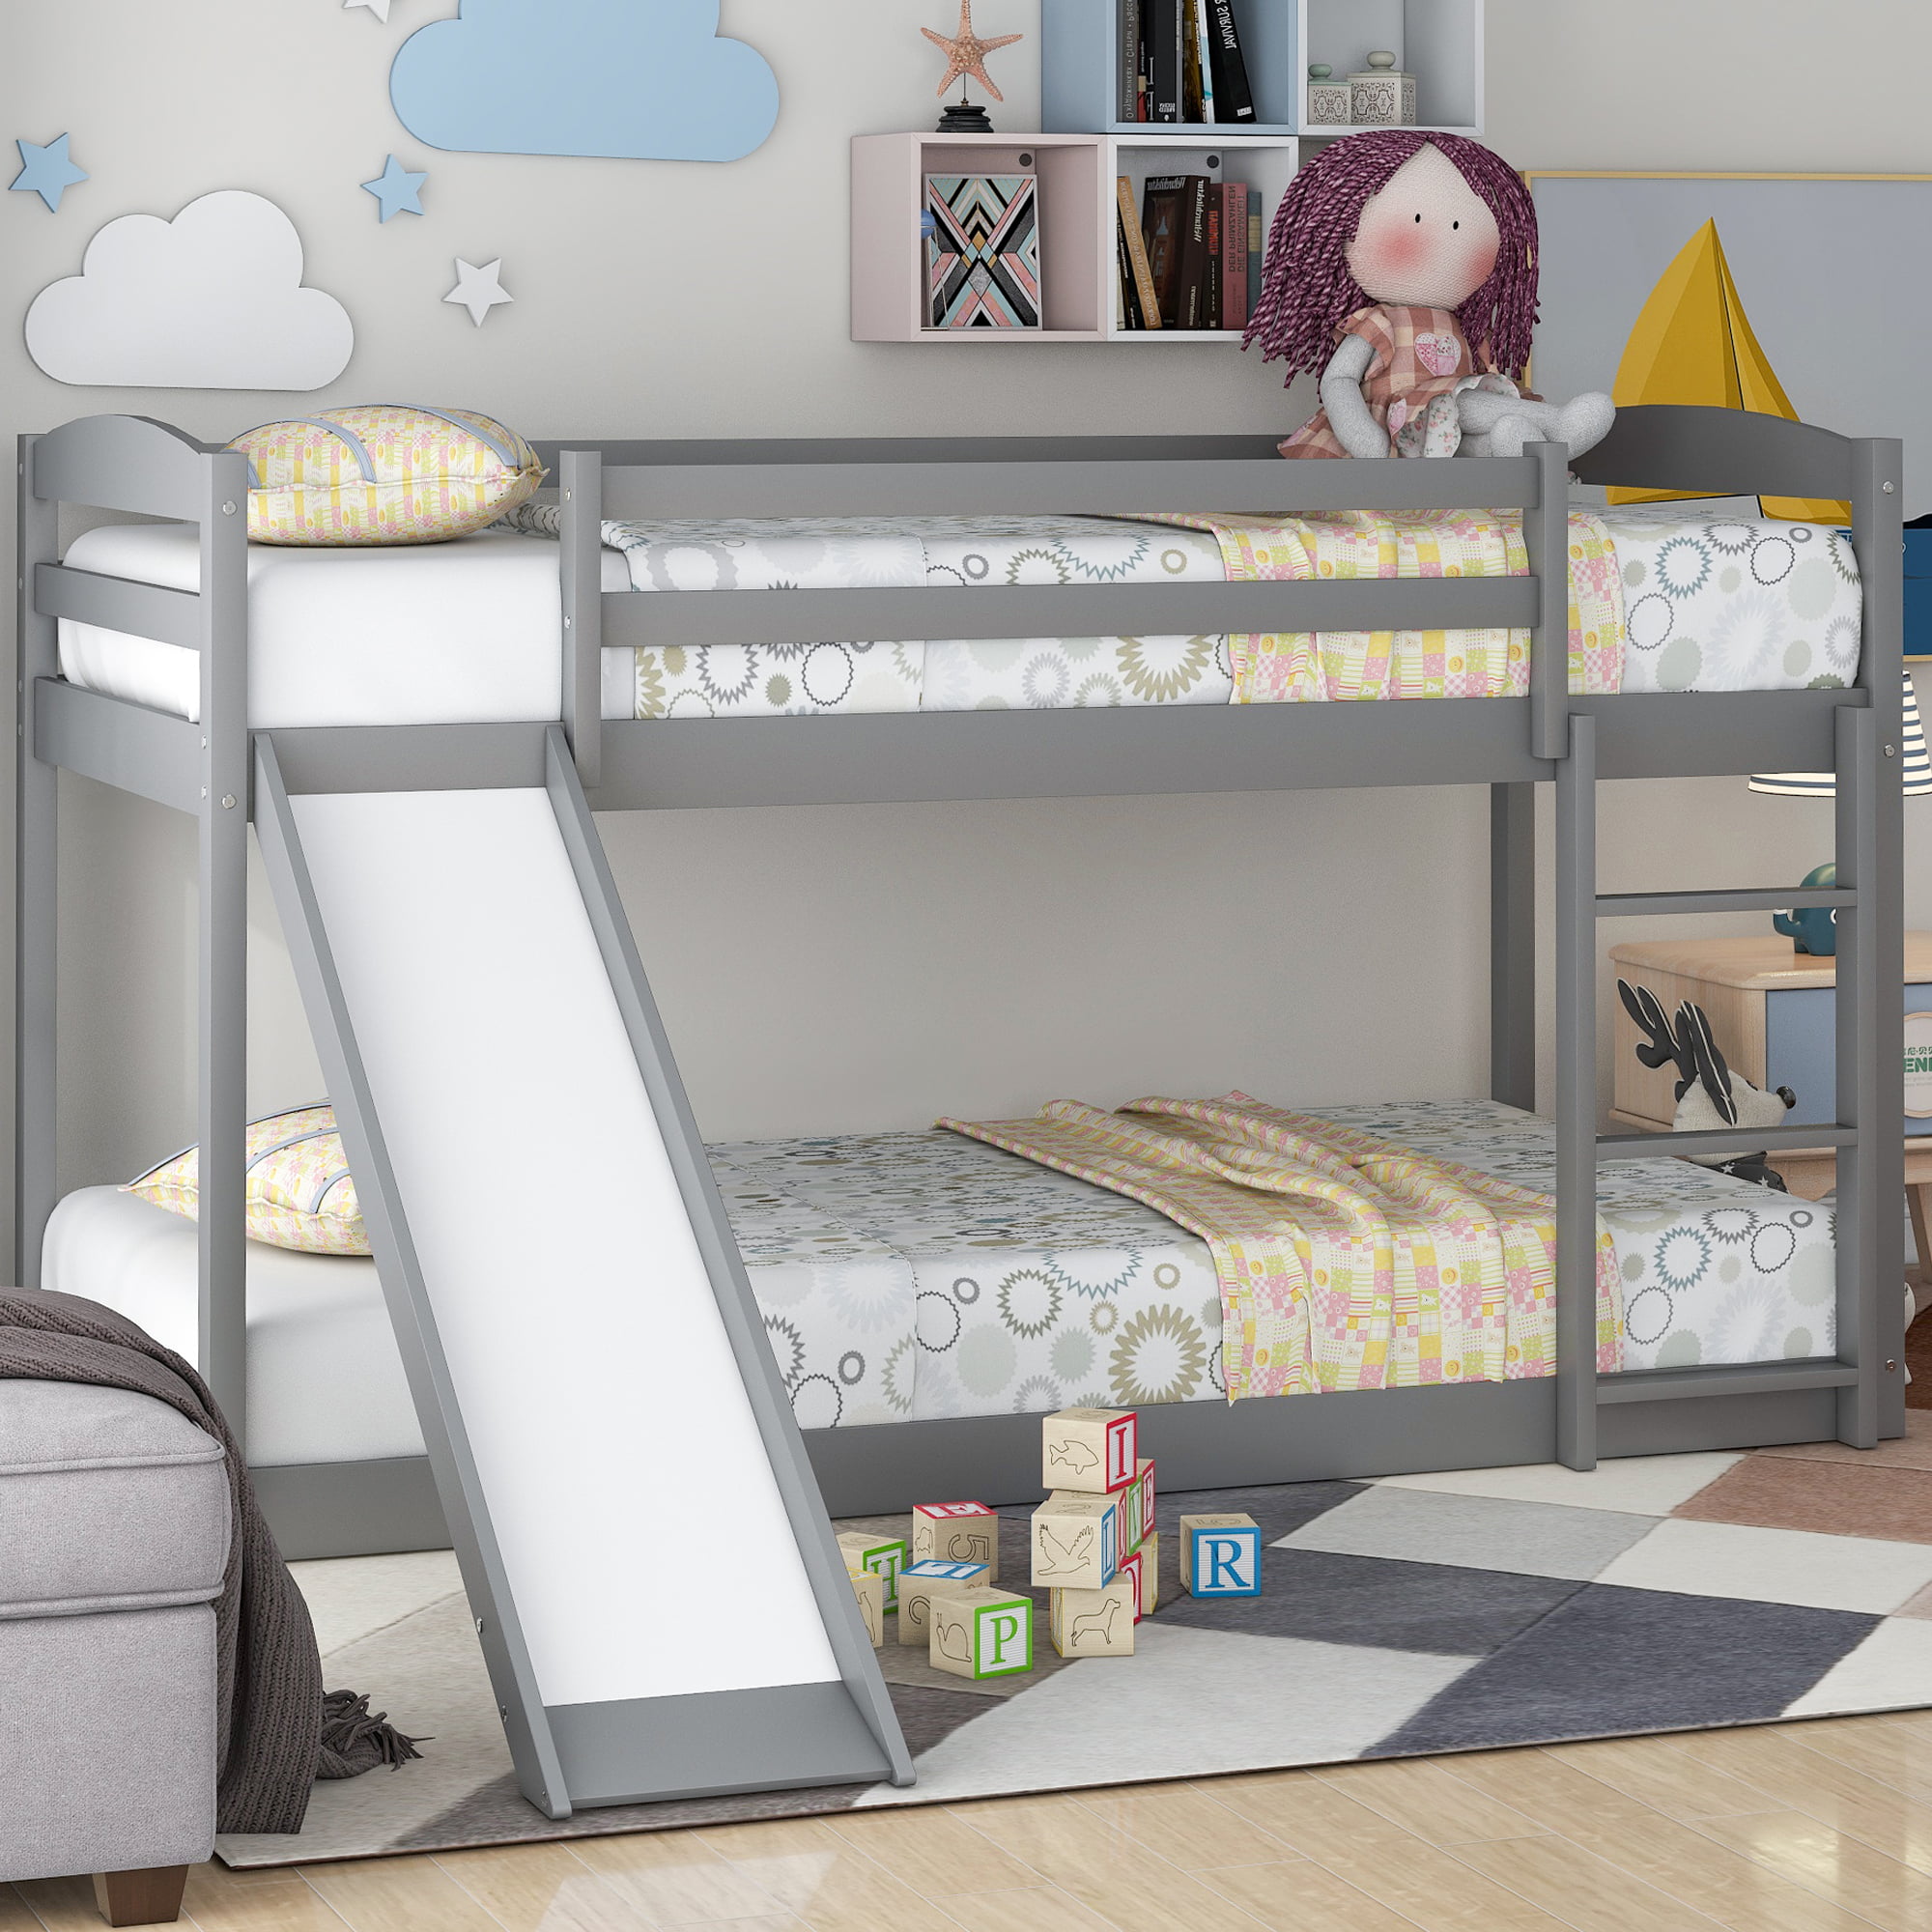 Bunk Bed With Slide Kids Beds, Replacement Slide For Bunk Bed